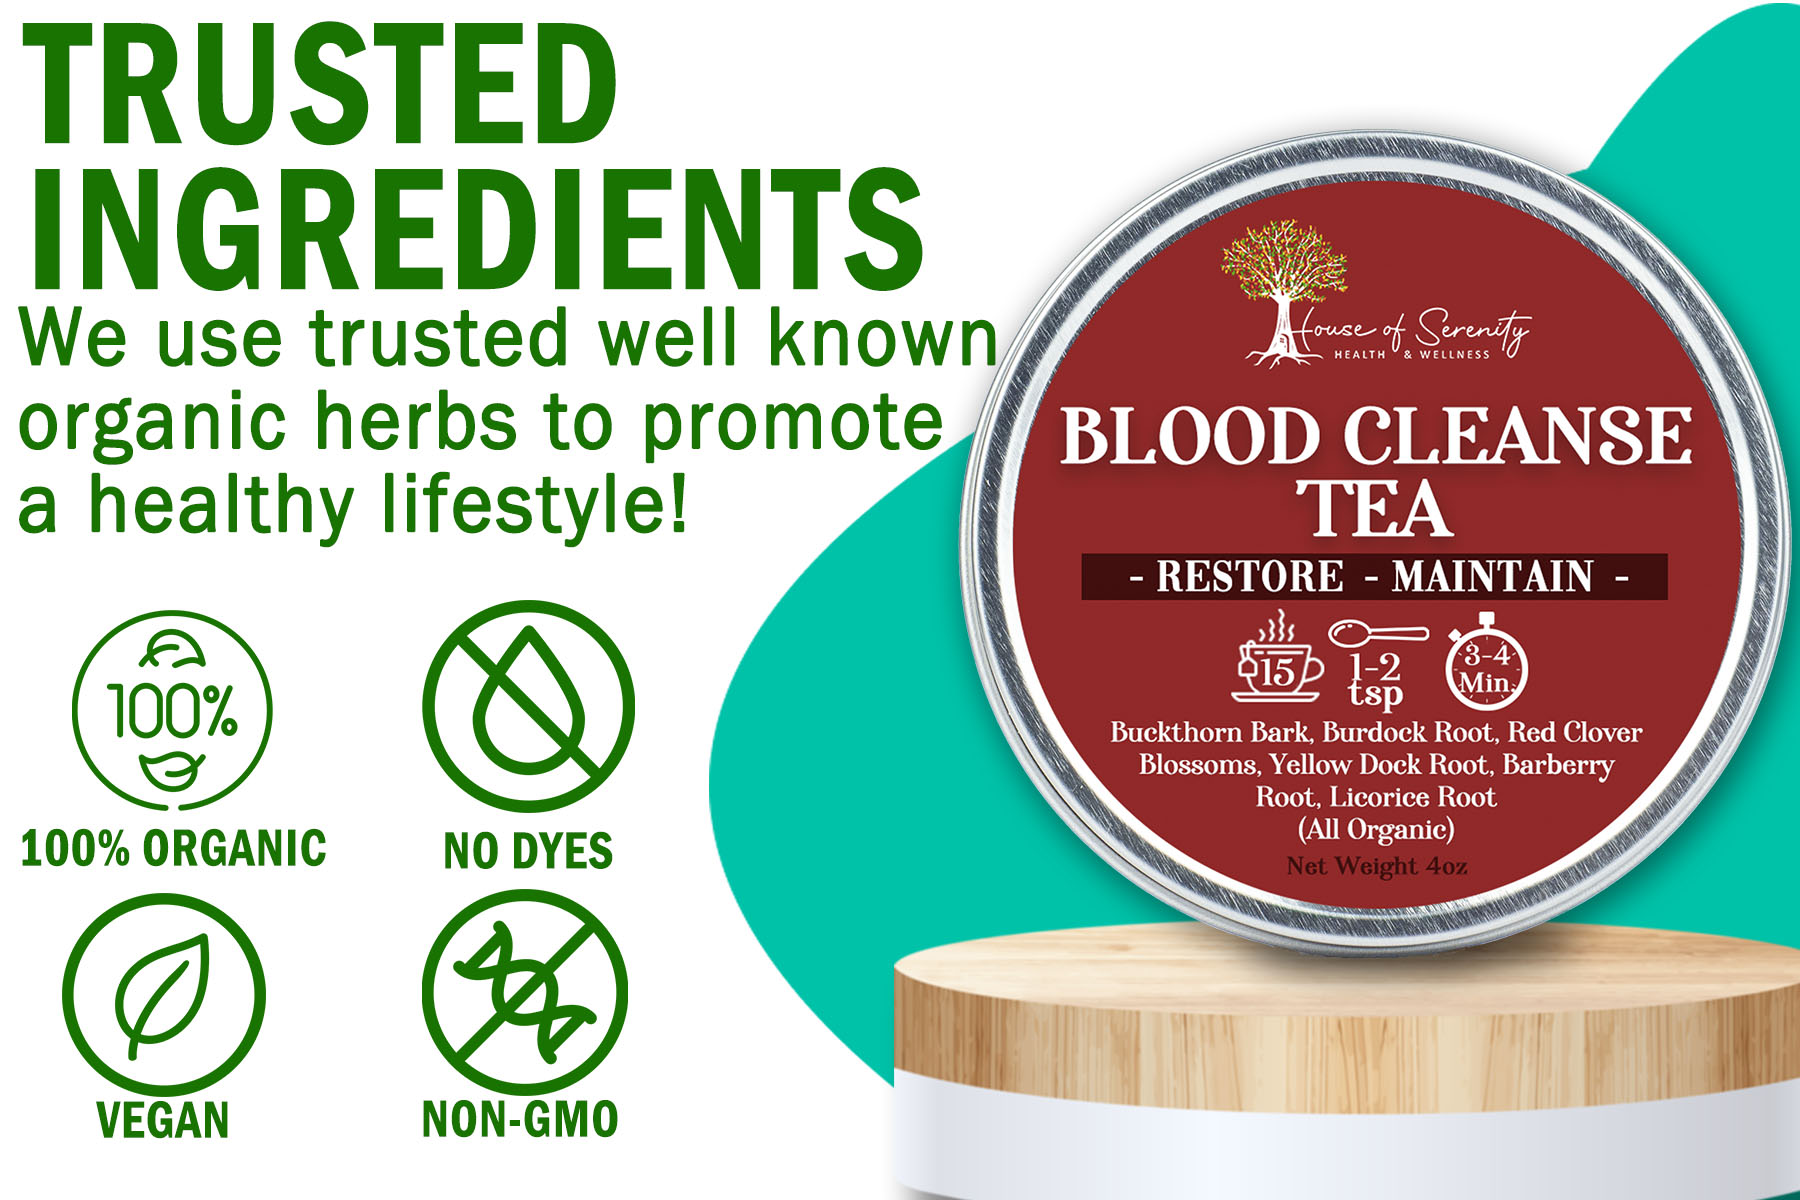 Blood Cleanse Tea by House of Serenity Health and Wellness